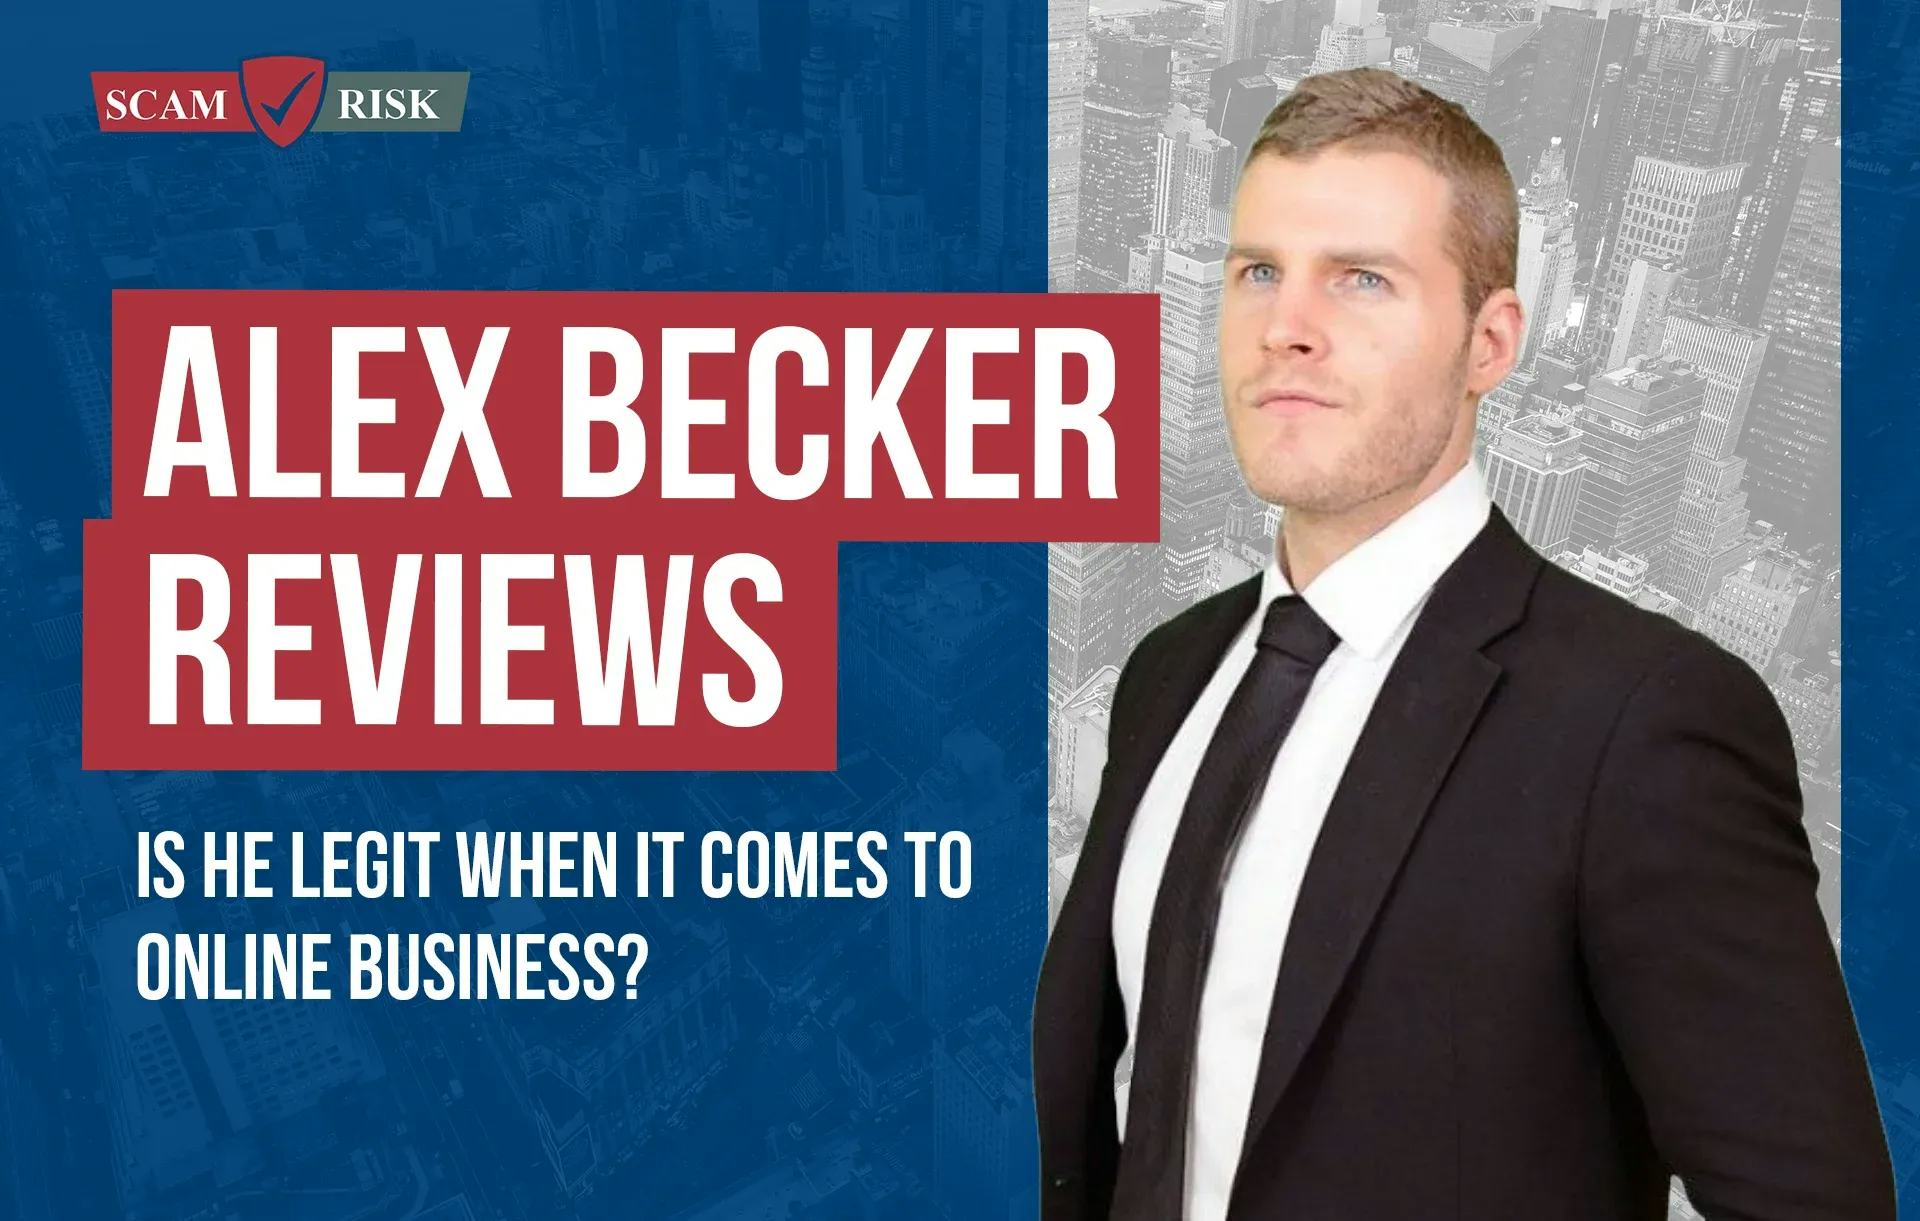 Alex Becker Reviews [year]: Is He Legit When It Comes To Online Business?